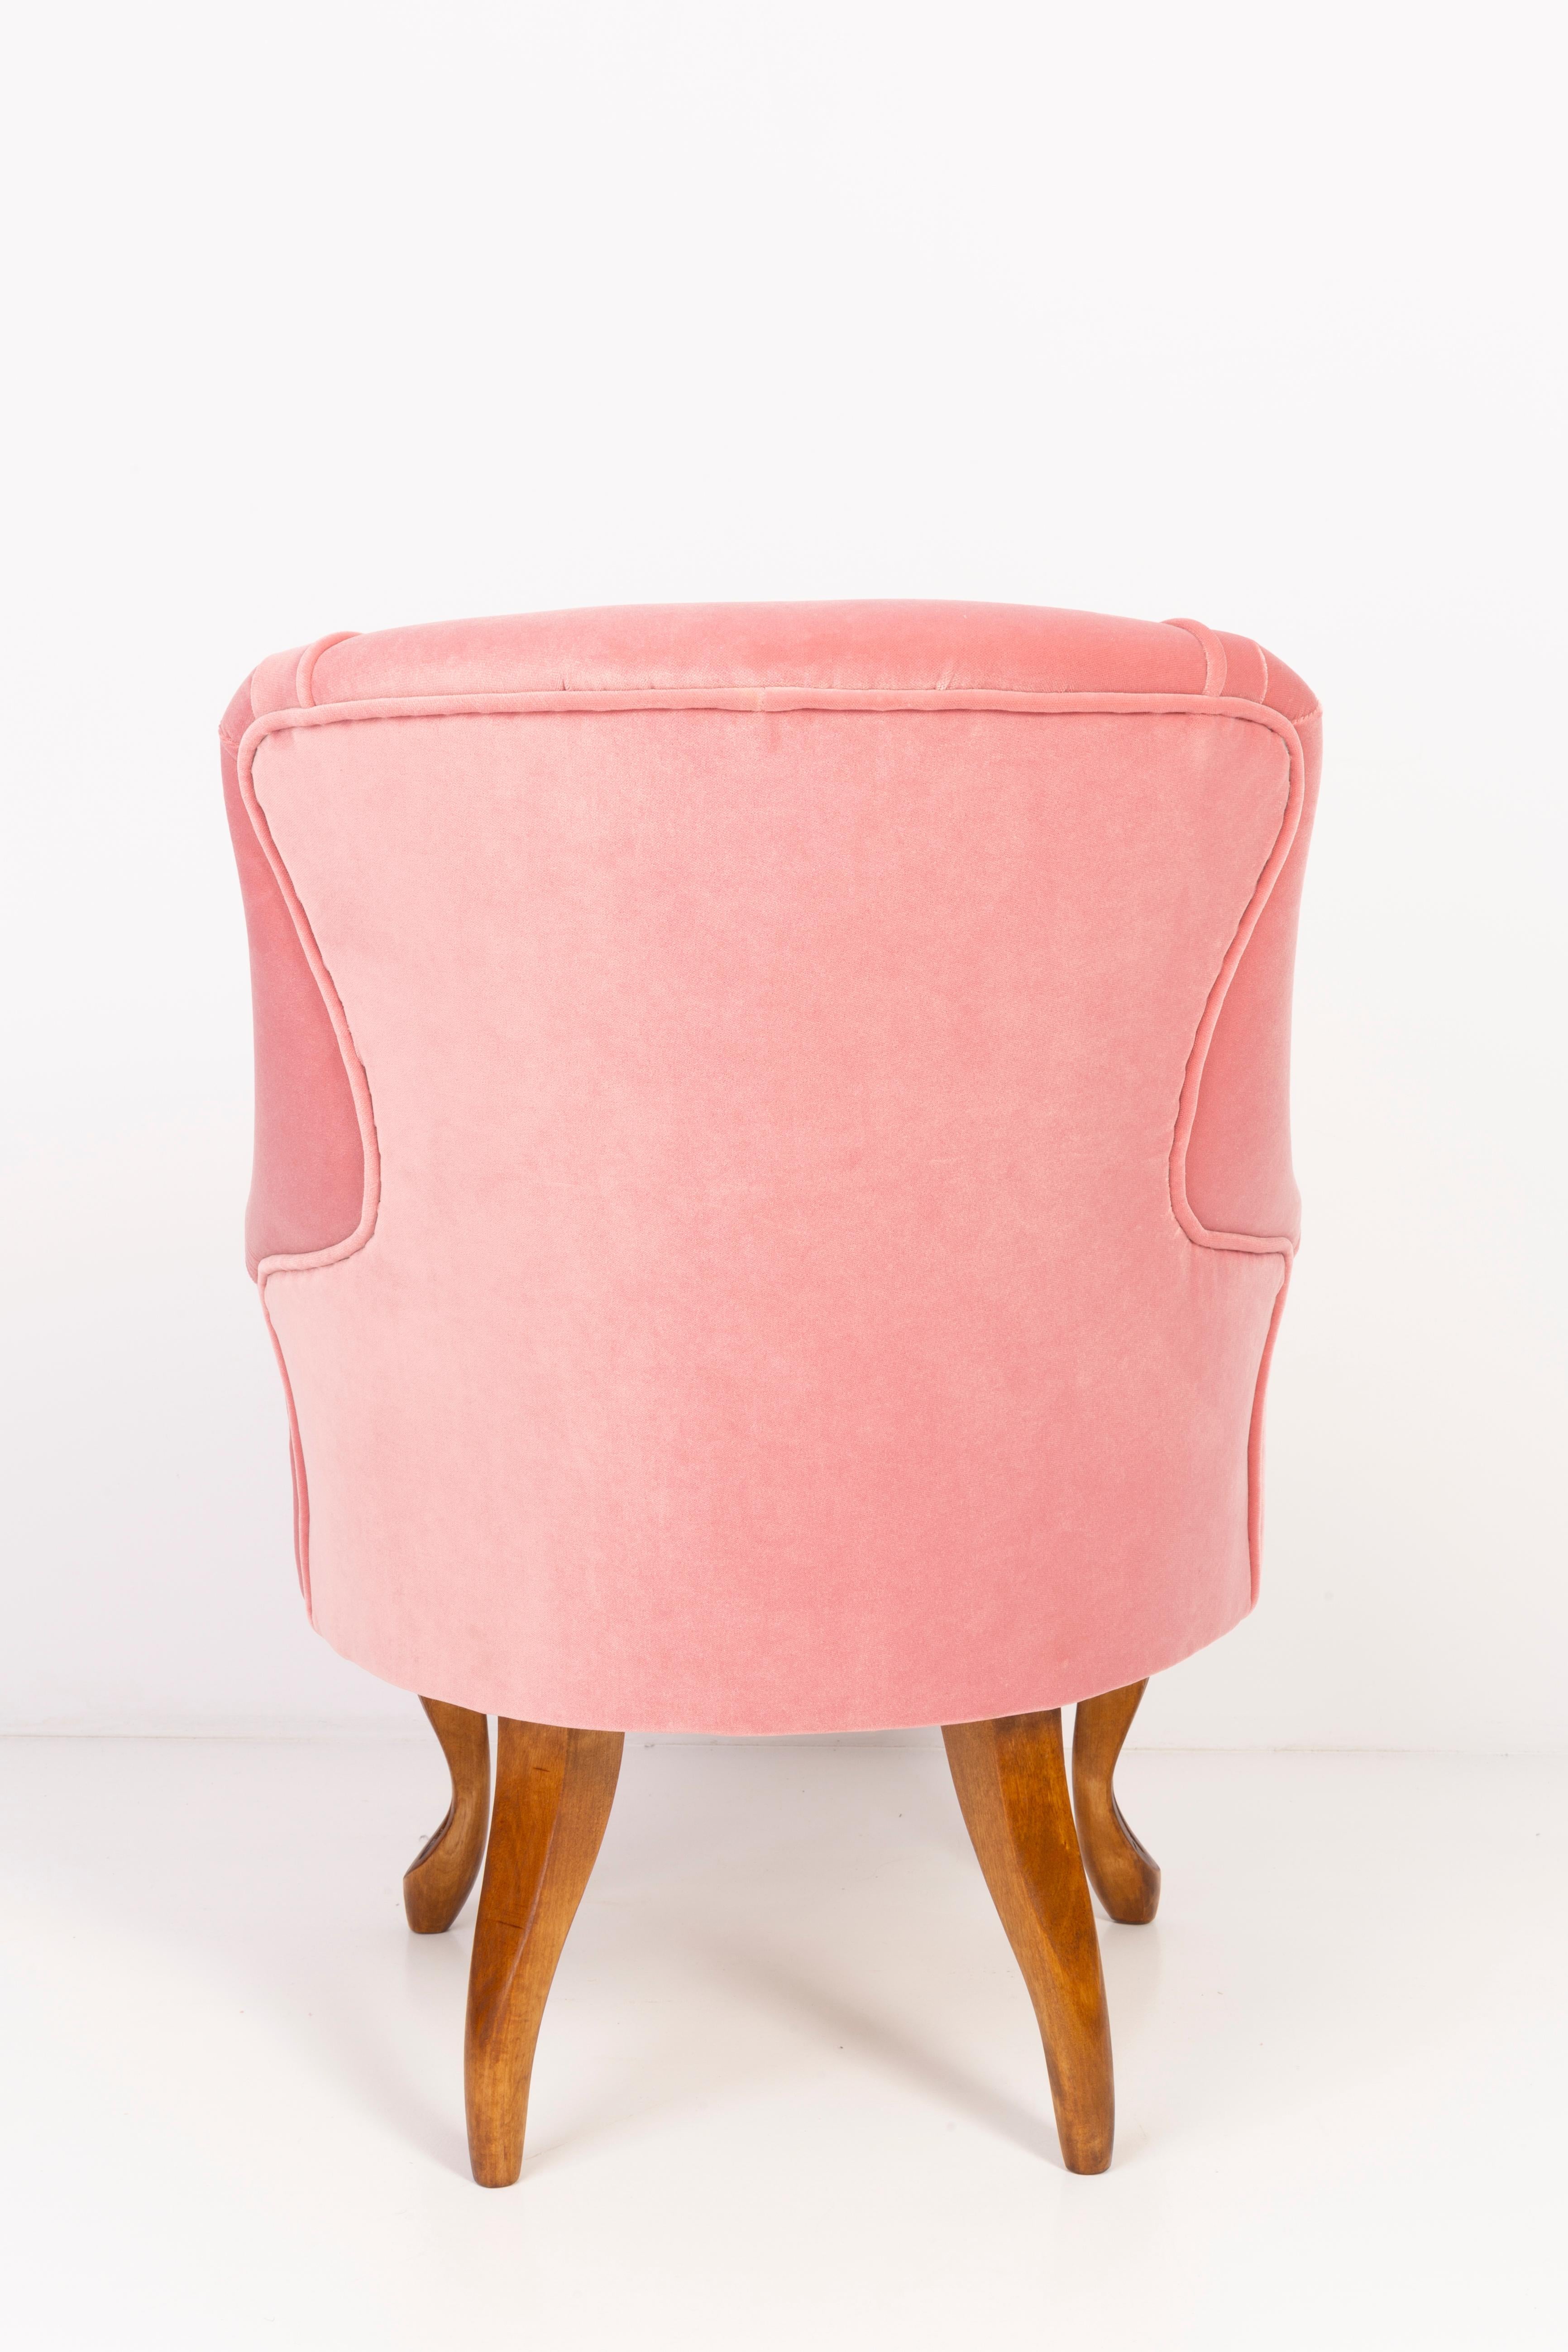 Set of Four 20th Century Art Deco Baby Pink Armchairs, 1950s For Sale 1